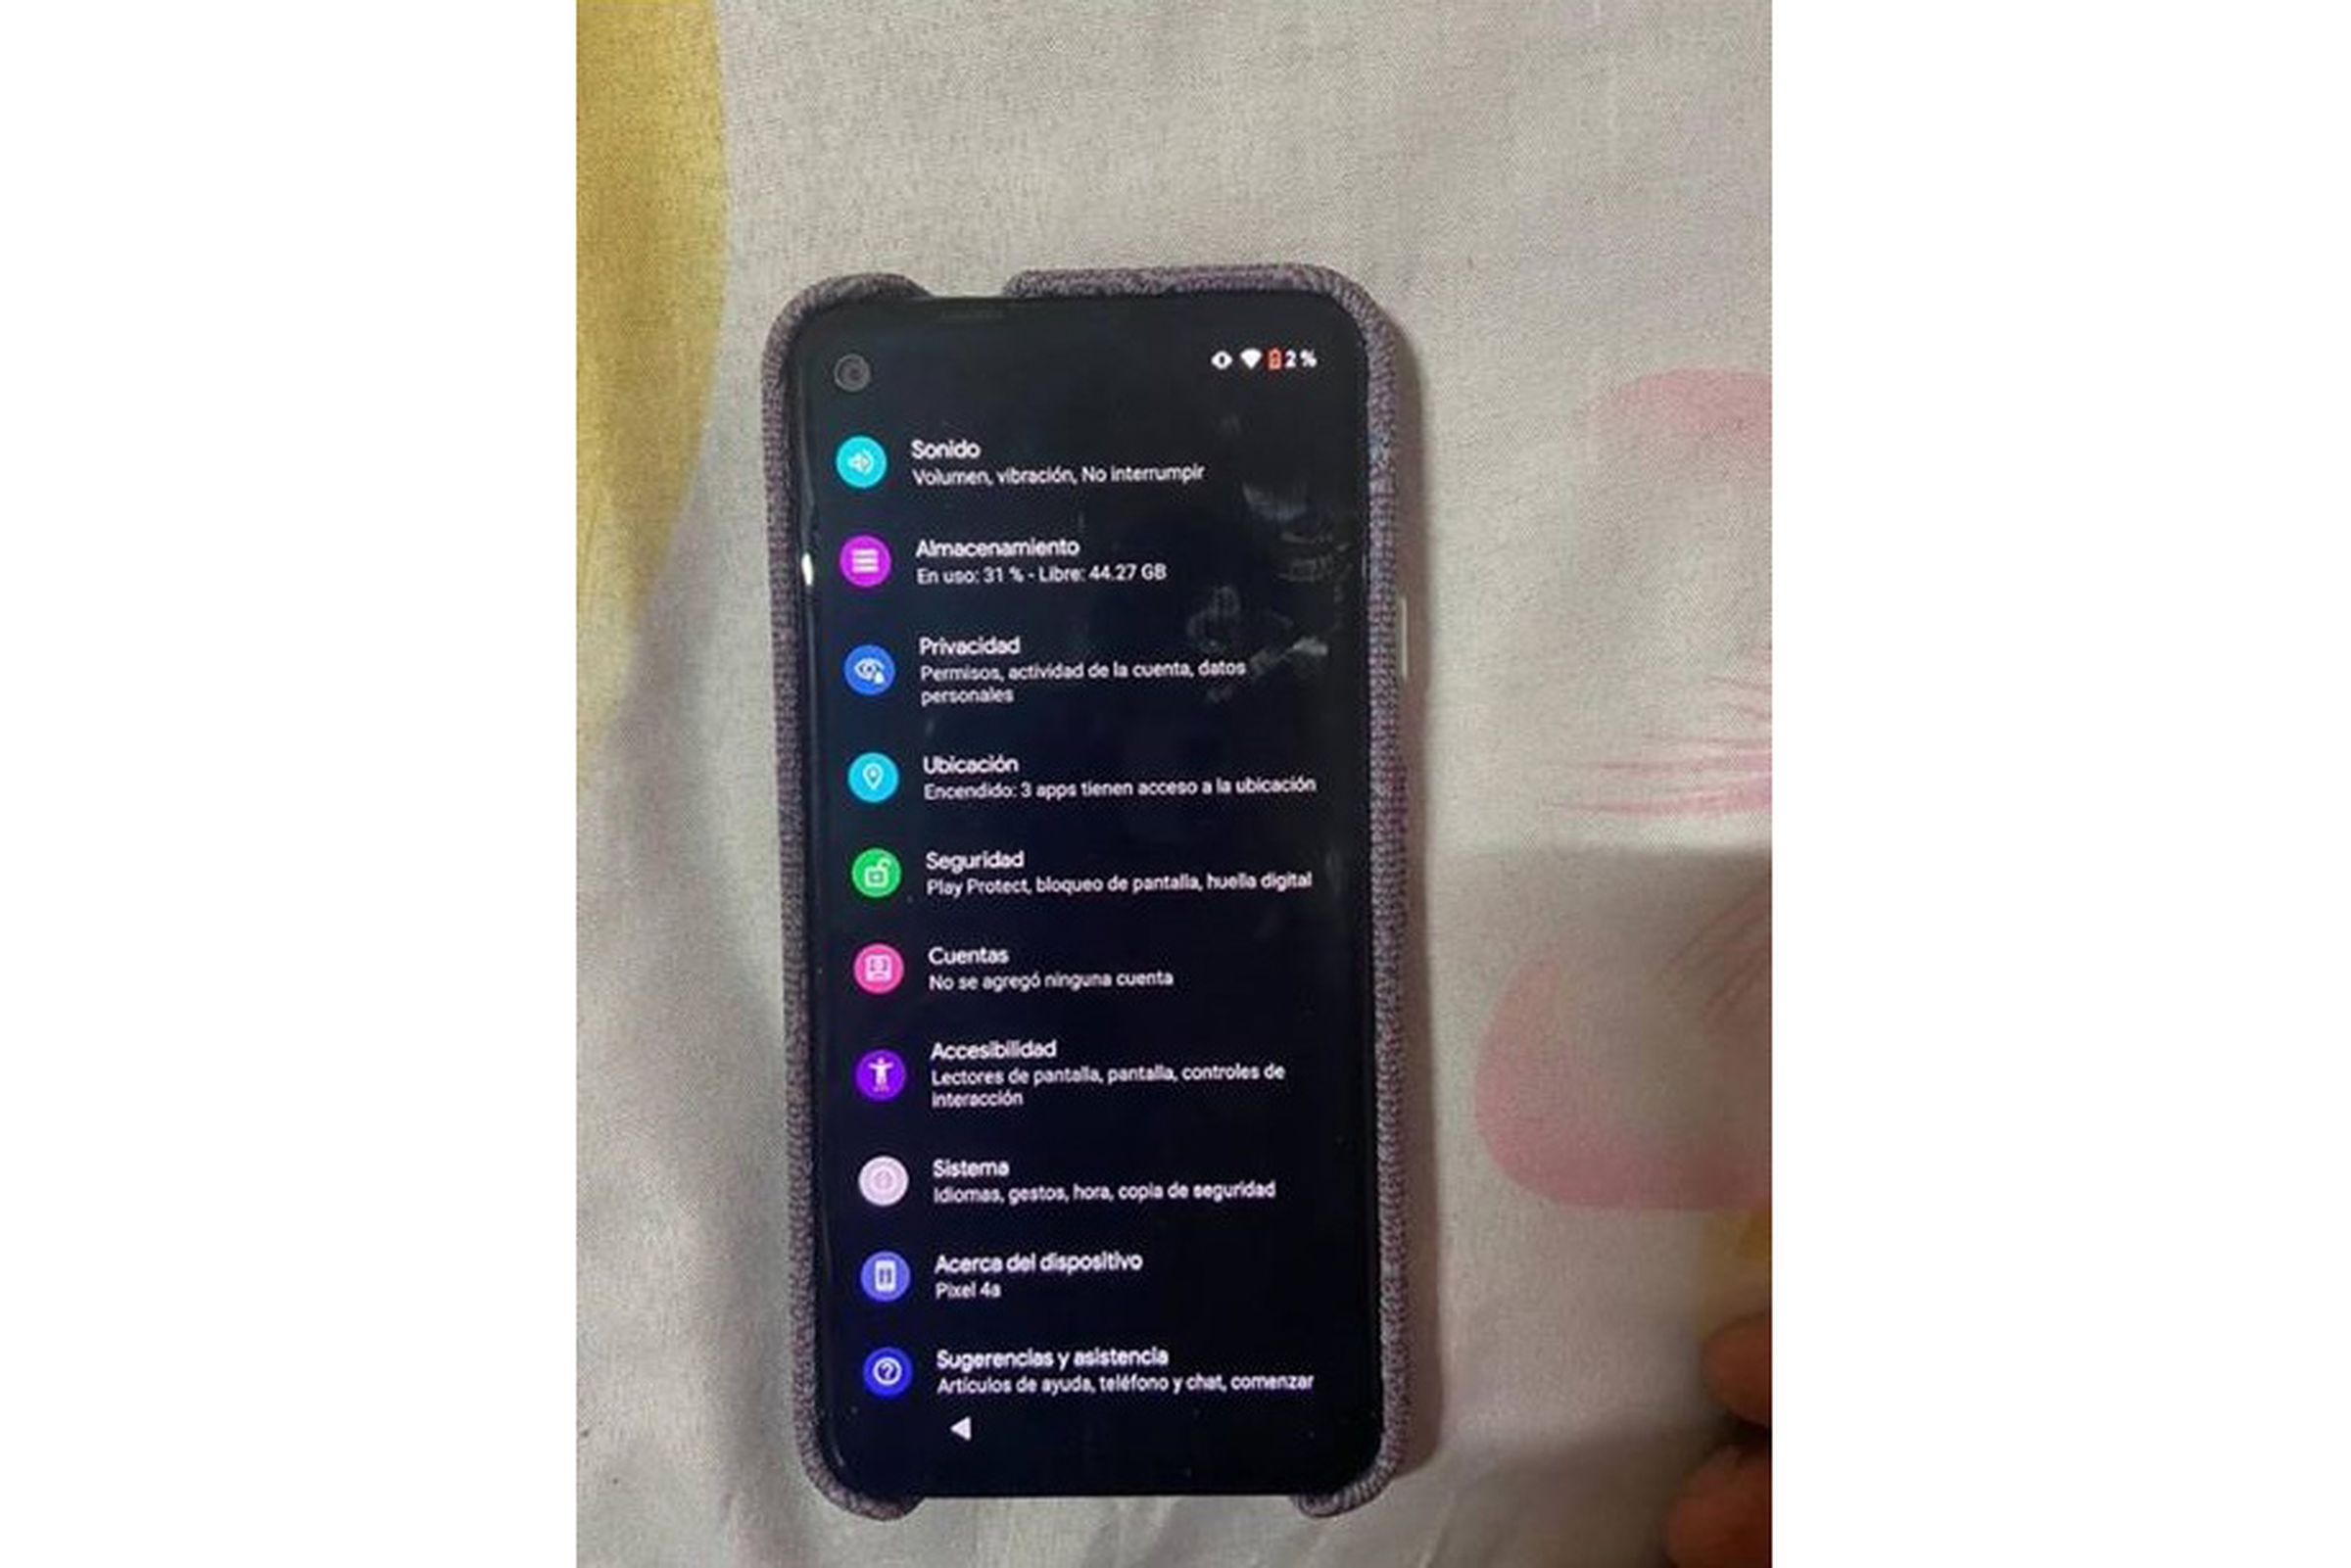 The settings menu for the device claims that it’s a Pixel 4A.